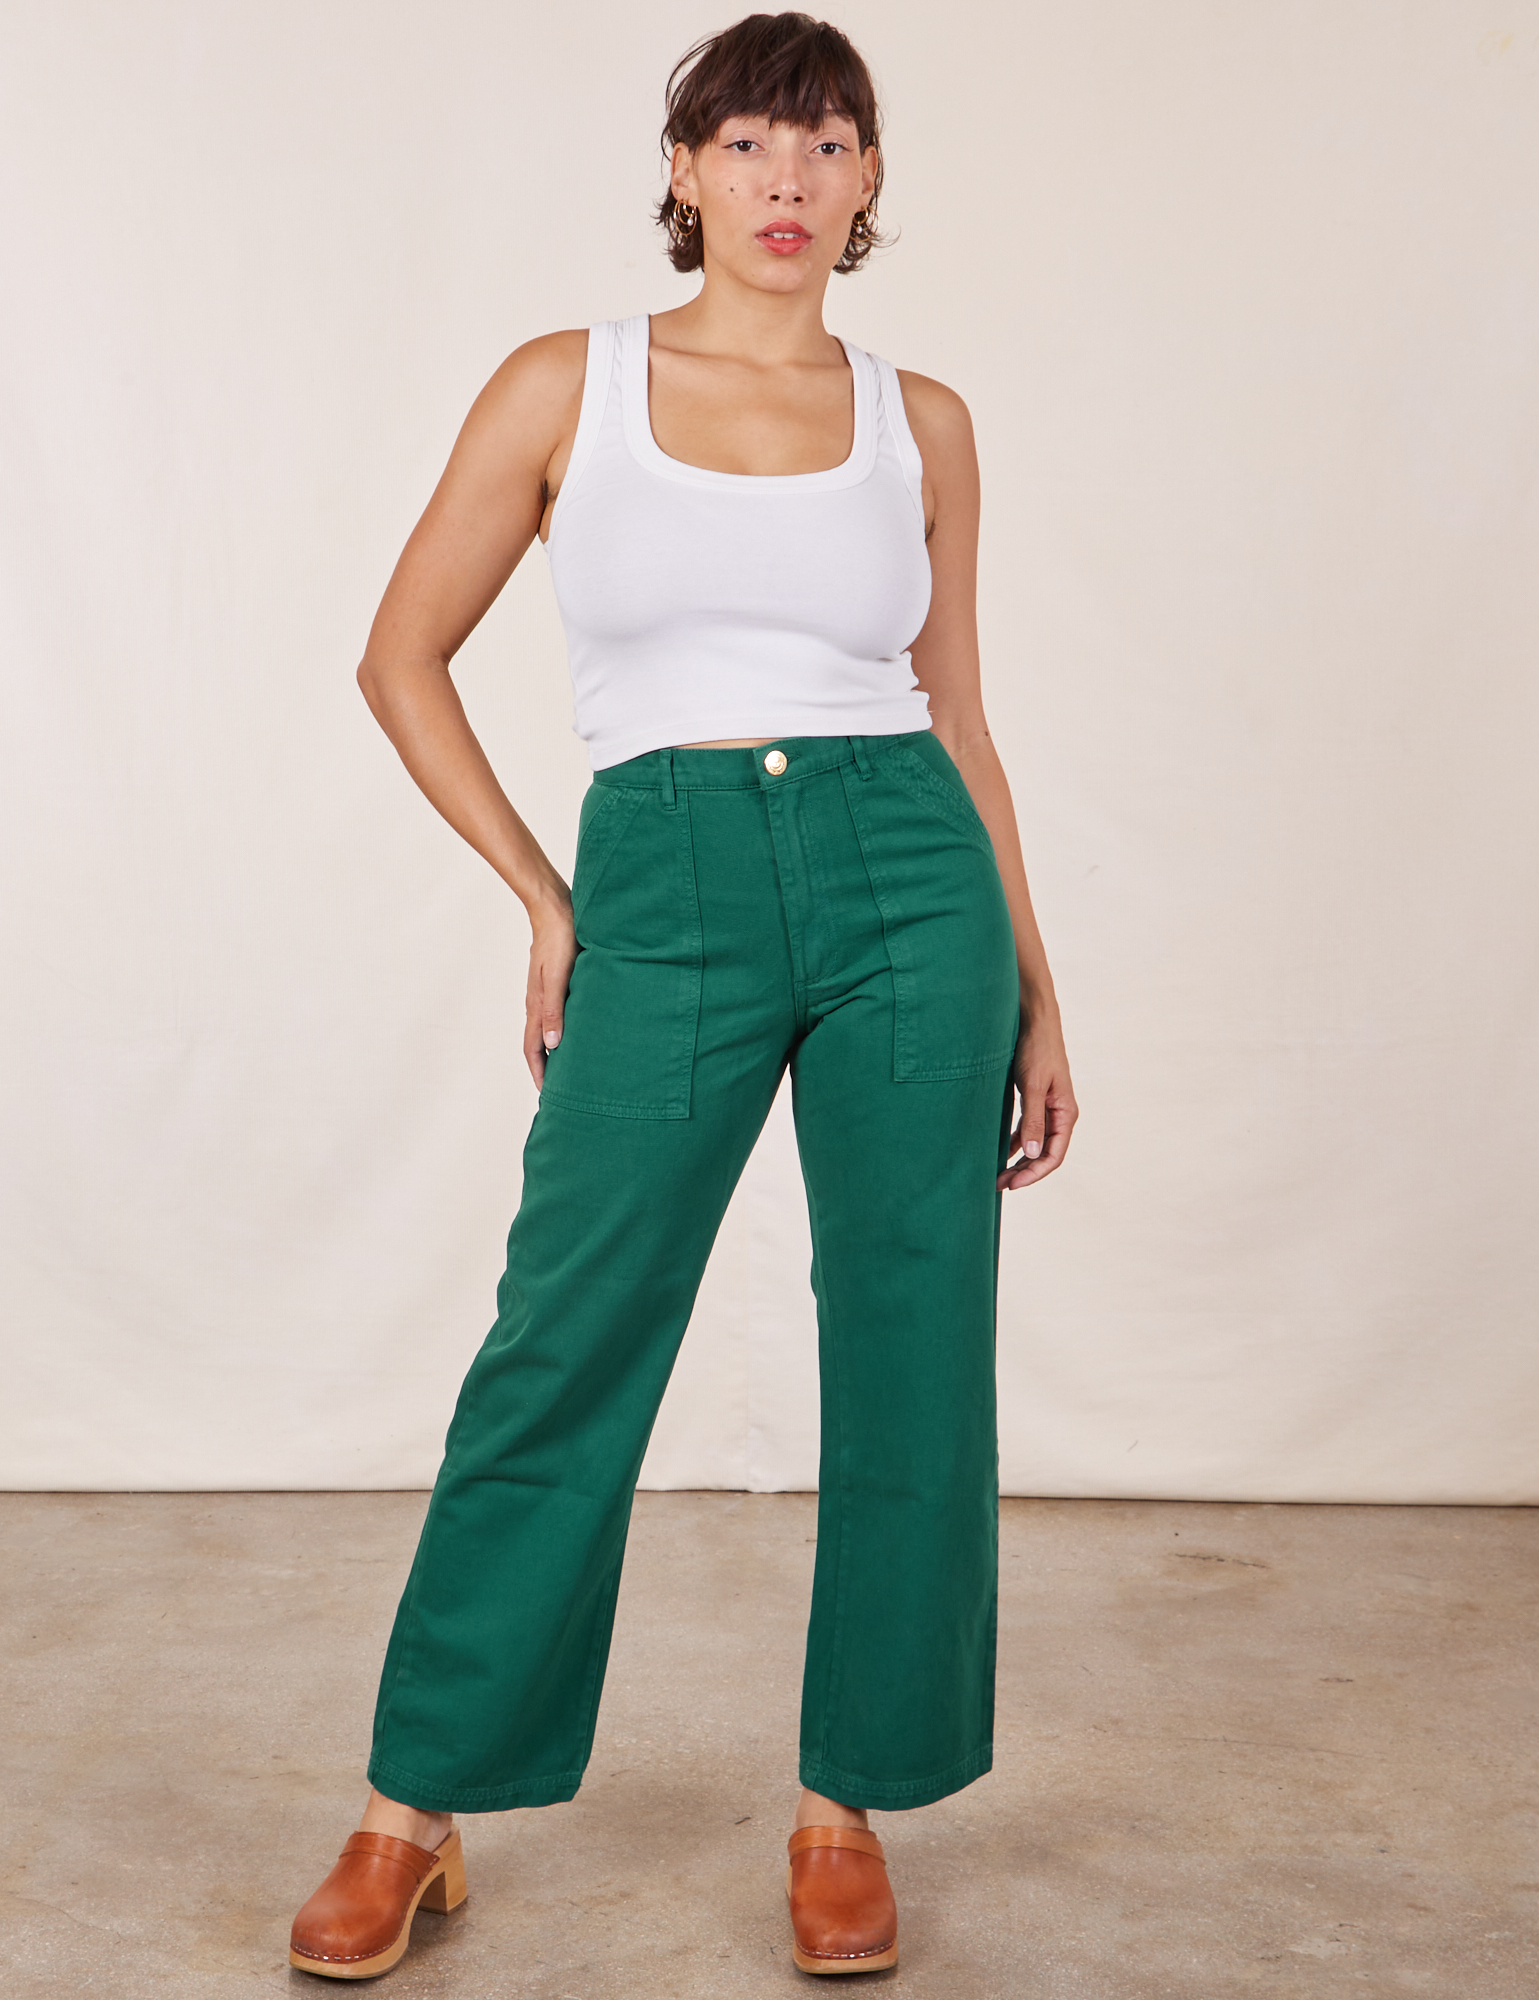 Tiara is 5'5" and wearing S Work Pants in Hunter Green paired with Cropped Tank Top in vintage tee off-white